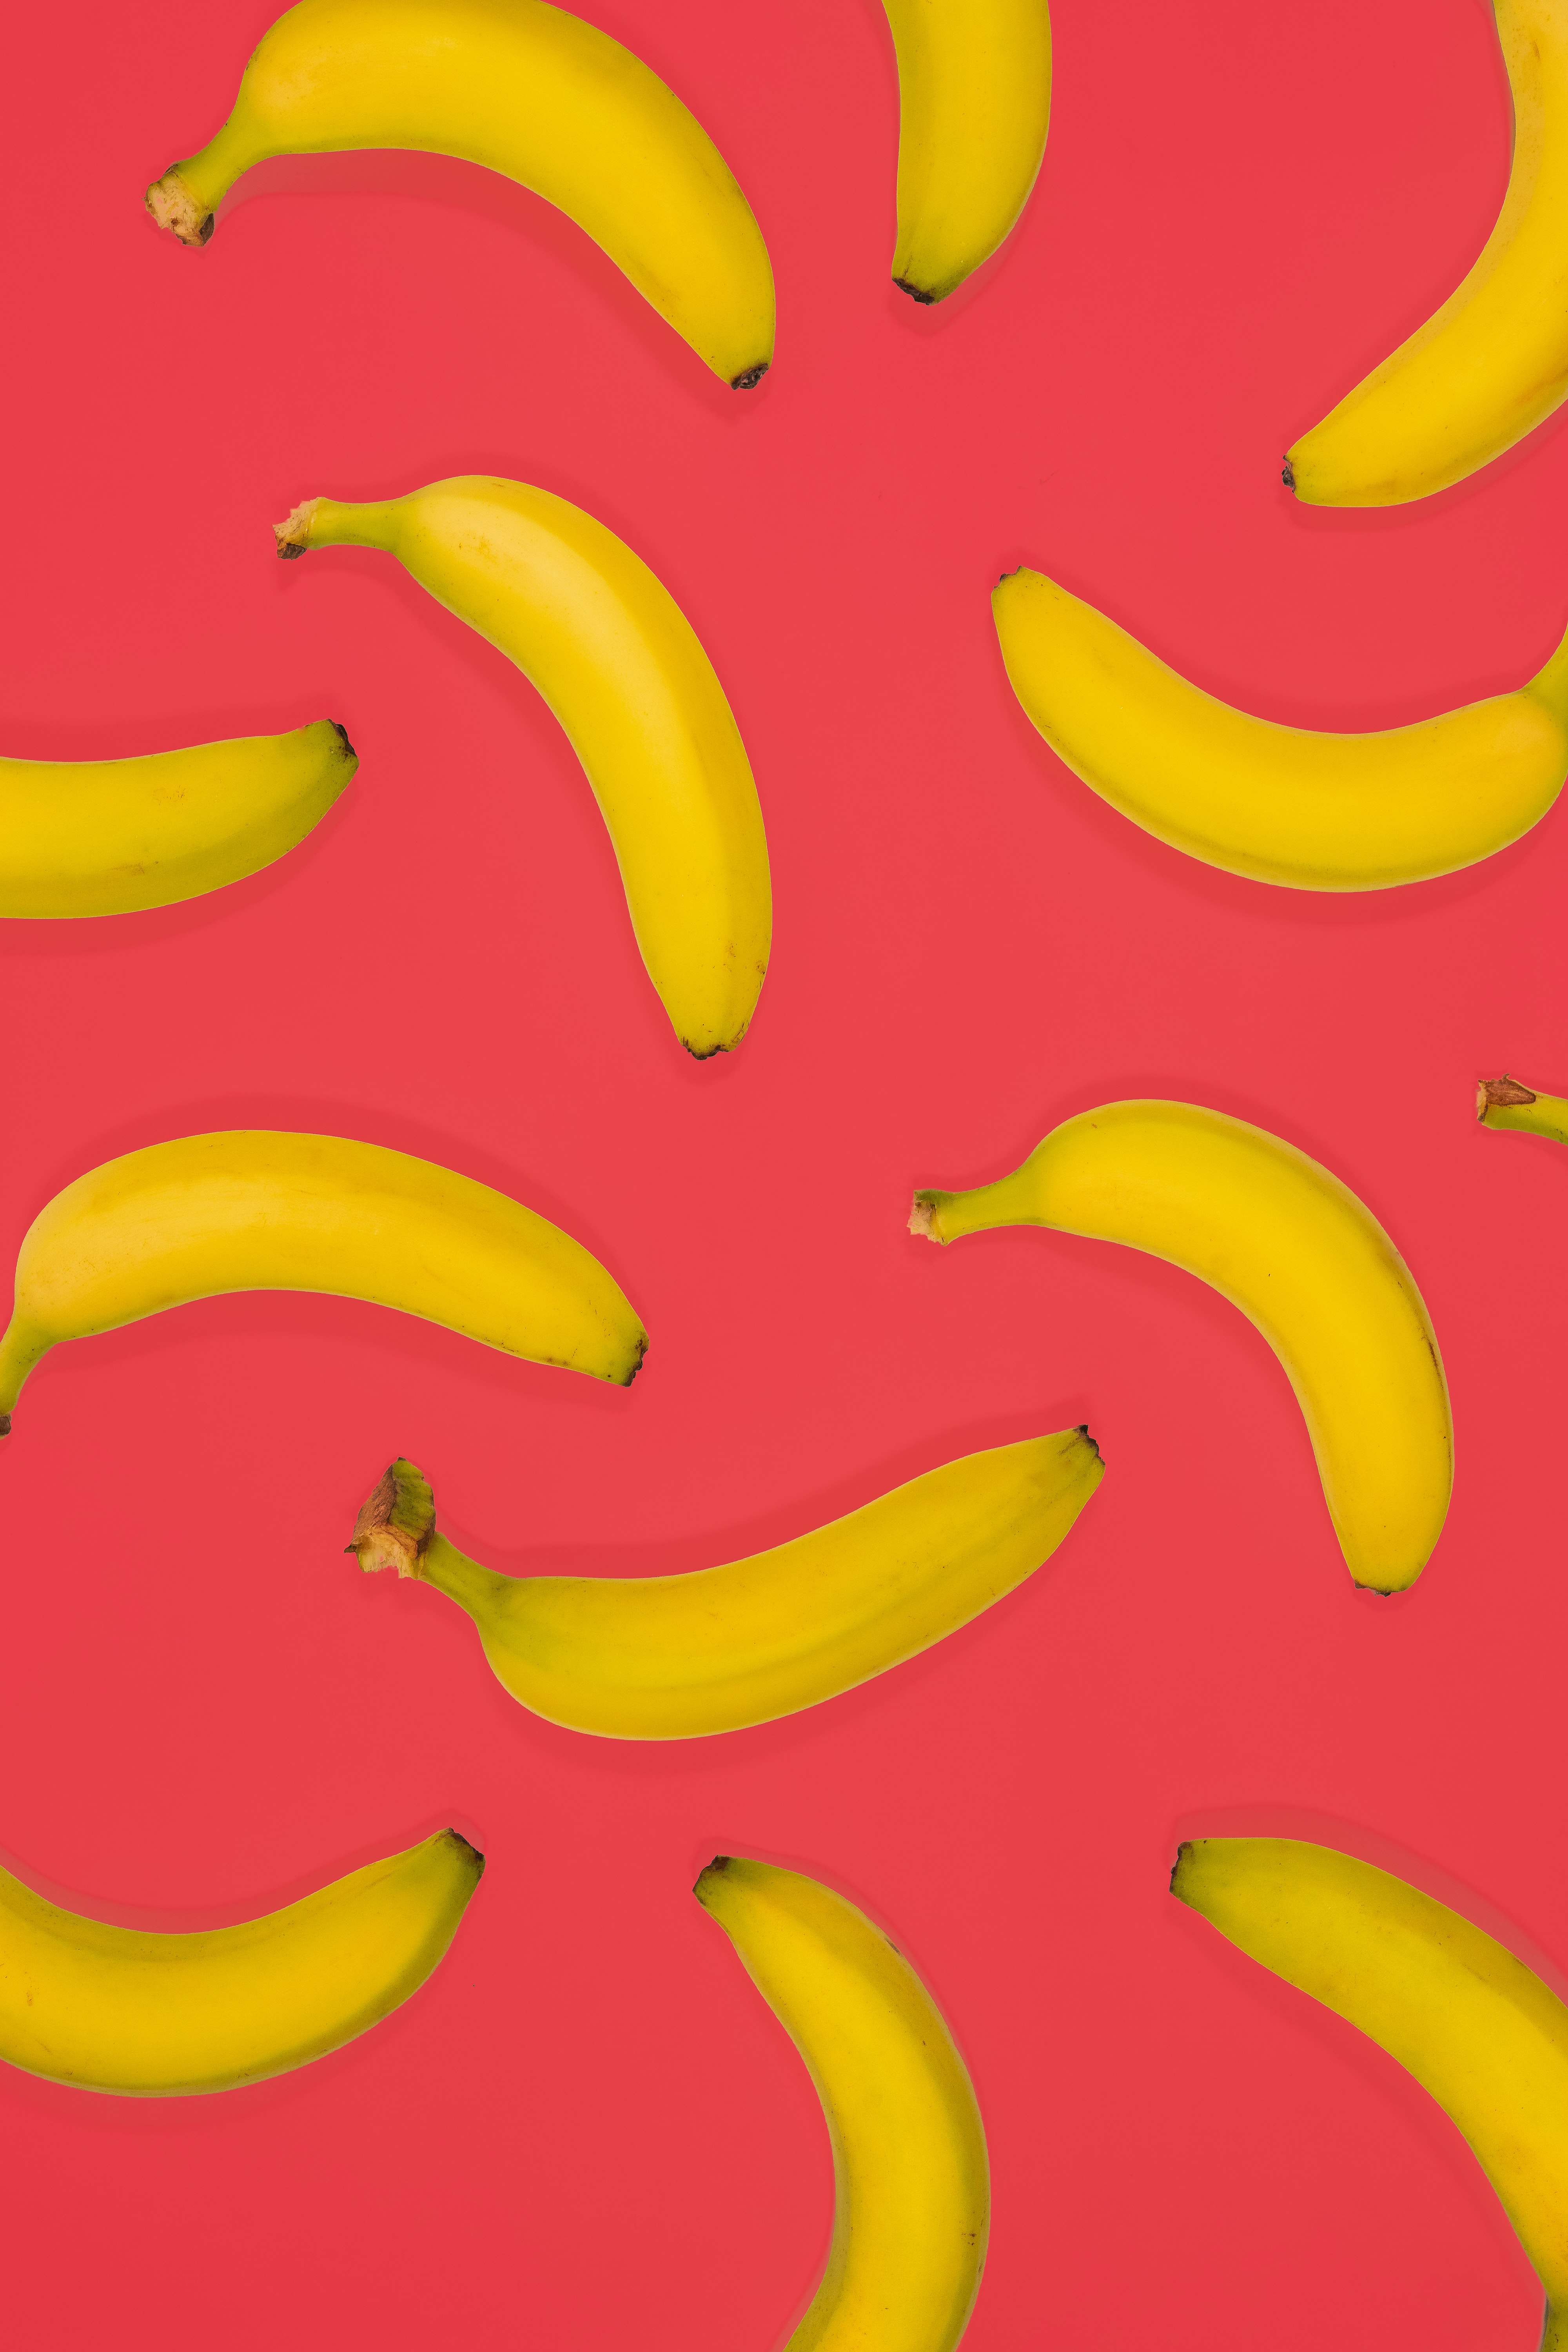 57276 Screensavers and Wallpapers Bananas for phone. Download fruits, food, bananas, pink, yellow pictures for free